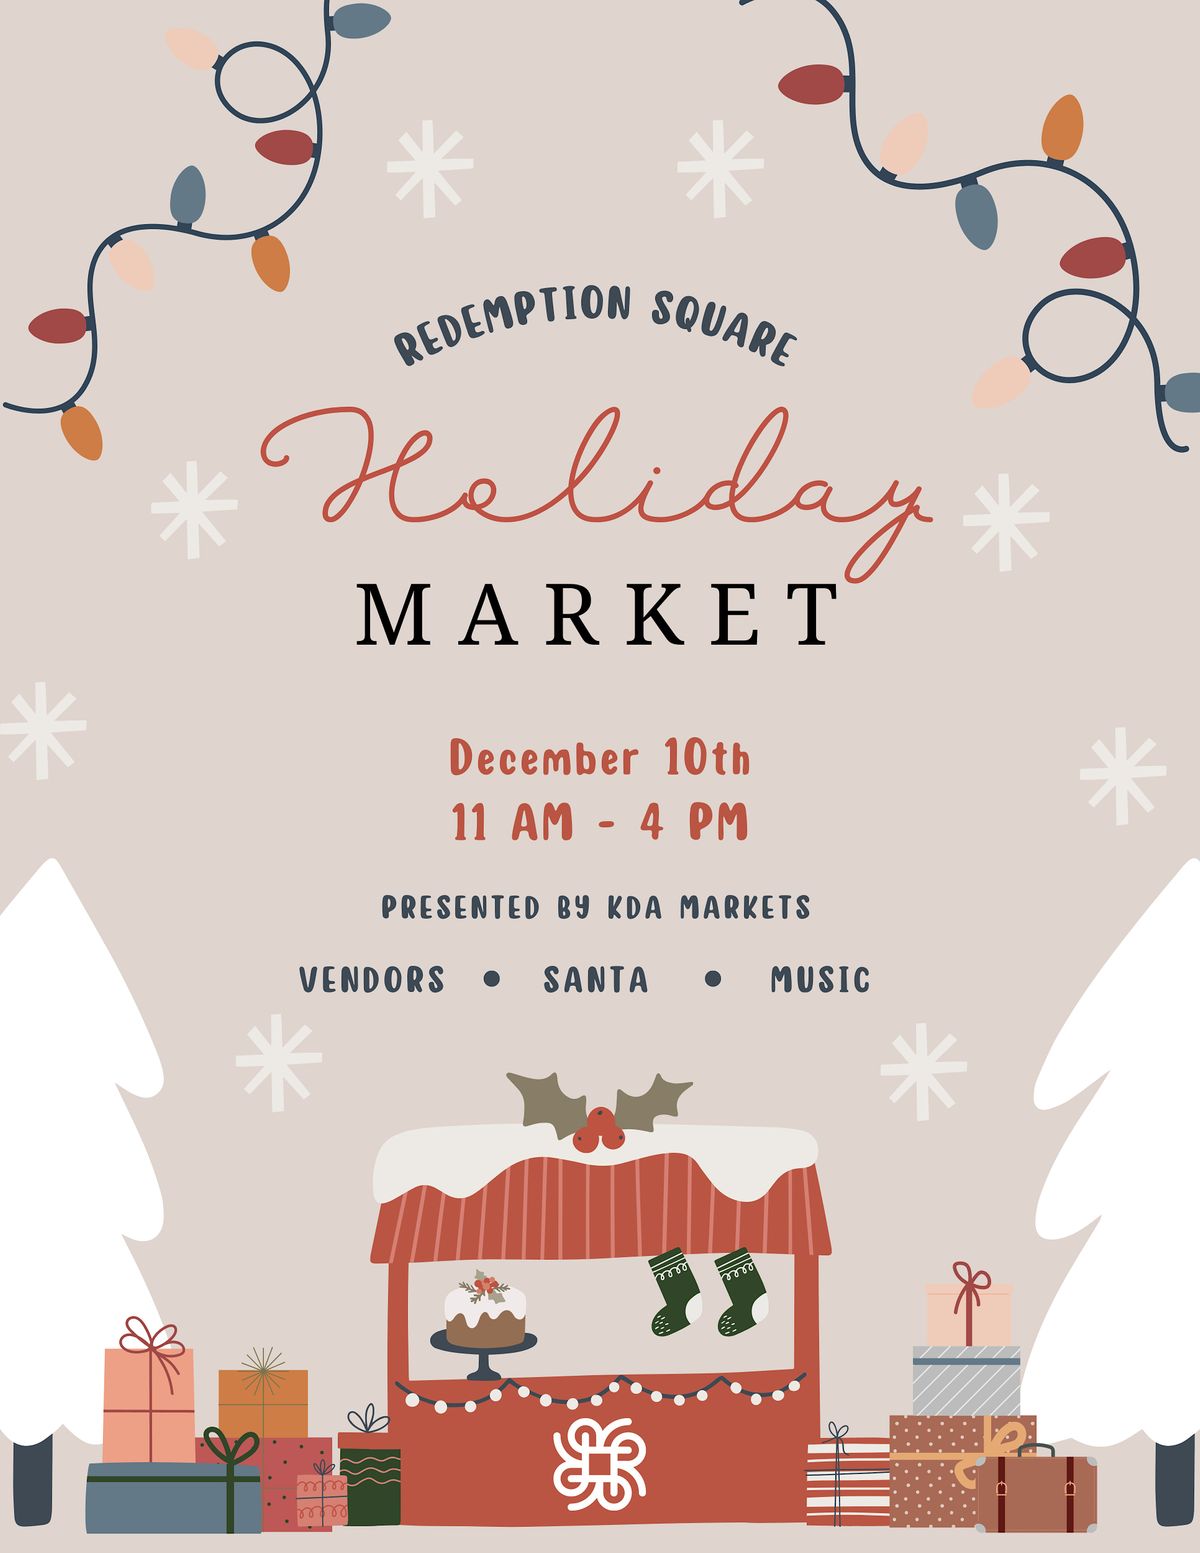 Redemption Square Holiday Market